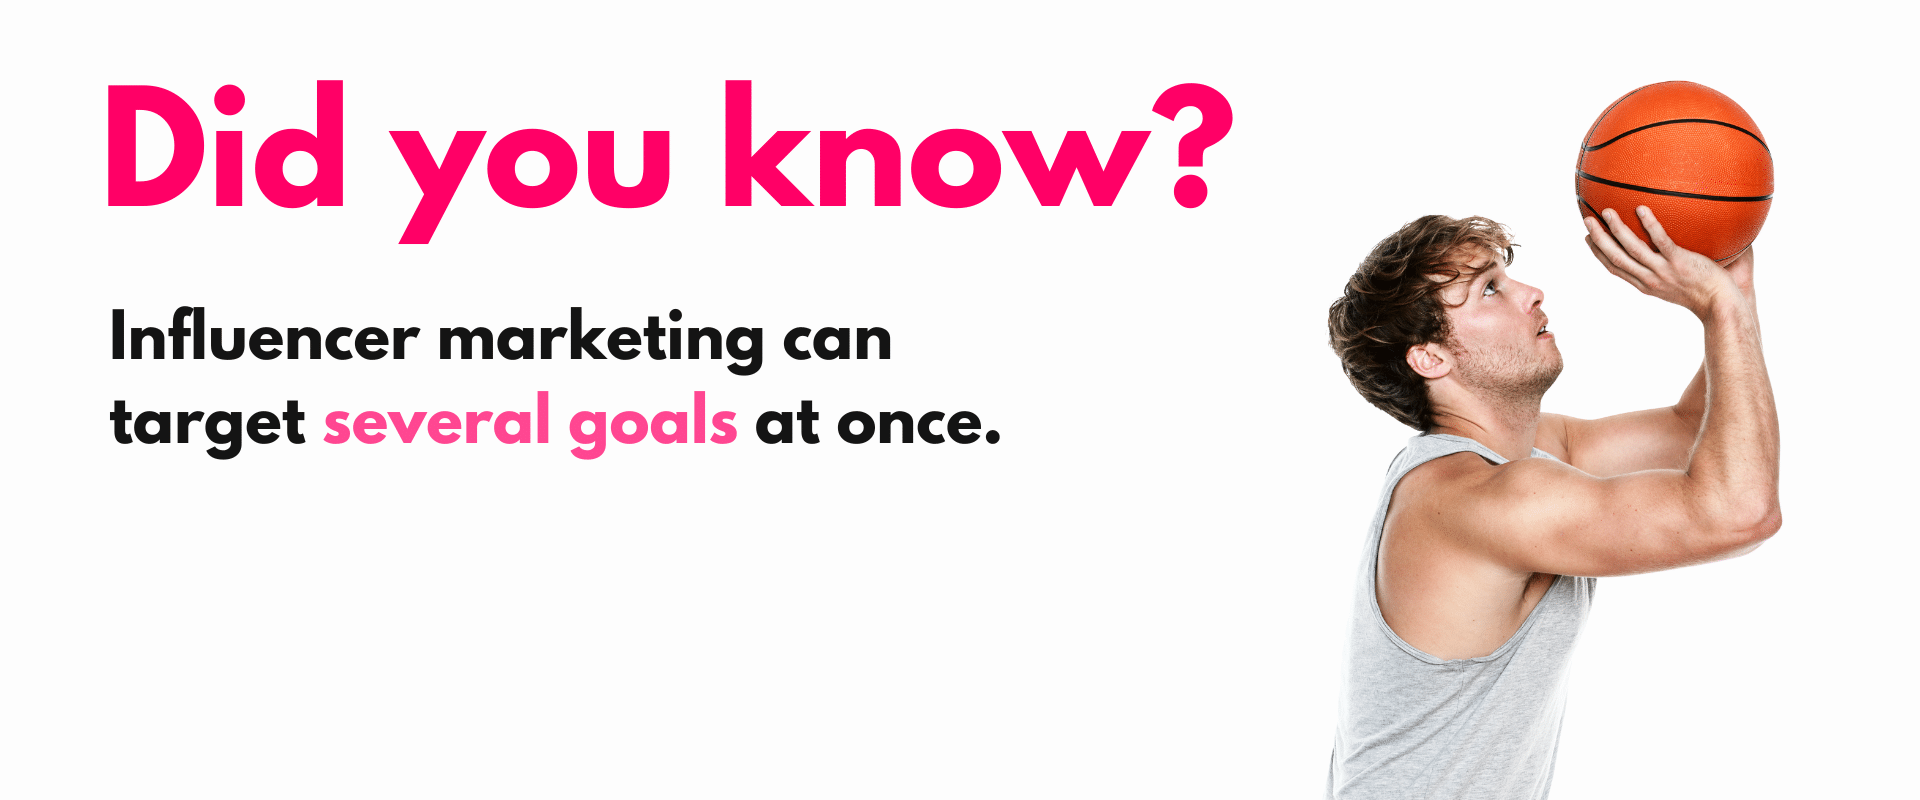 Did you know? influence marketing can target several goals at once.